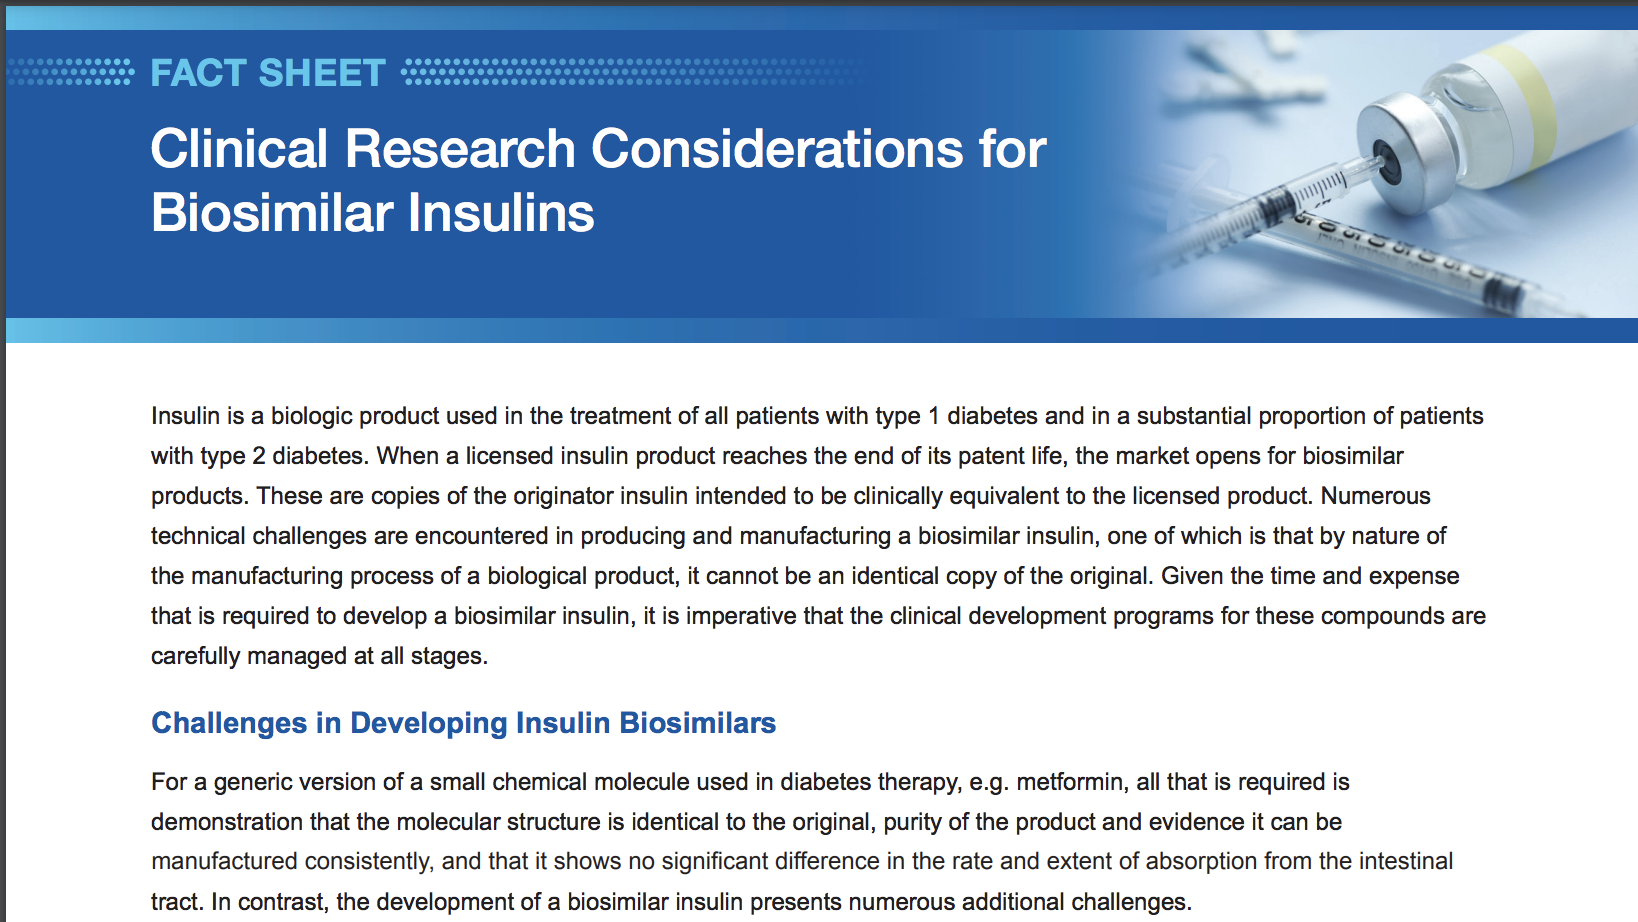 image of Clinical Research Considerations for Biosimilar Insulins